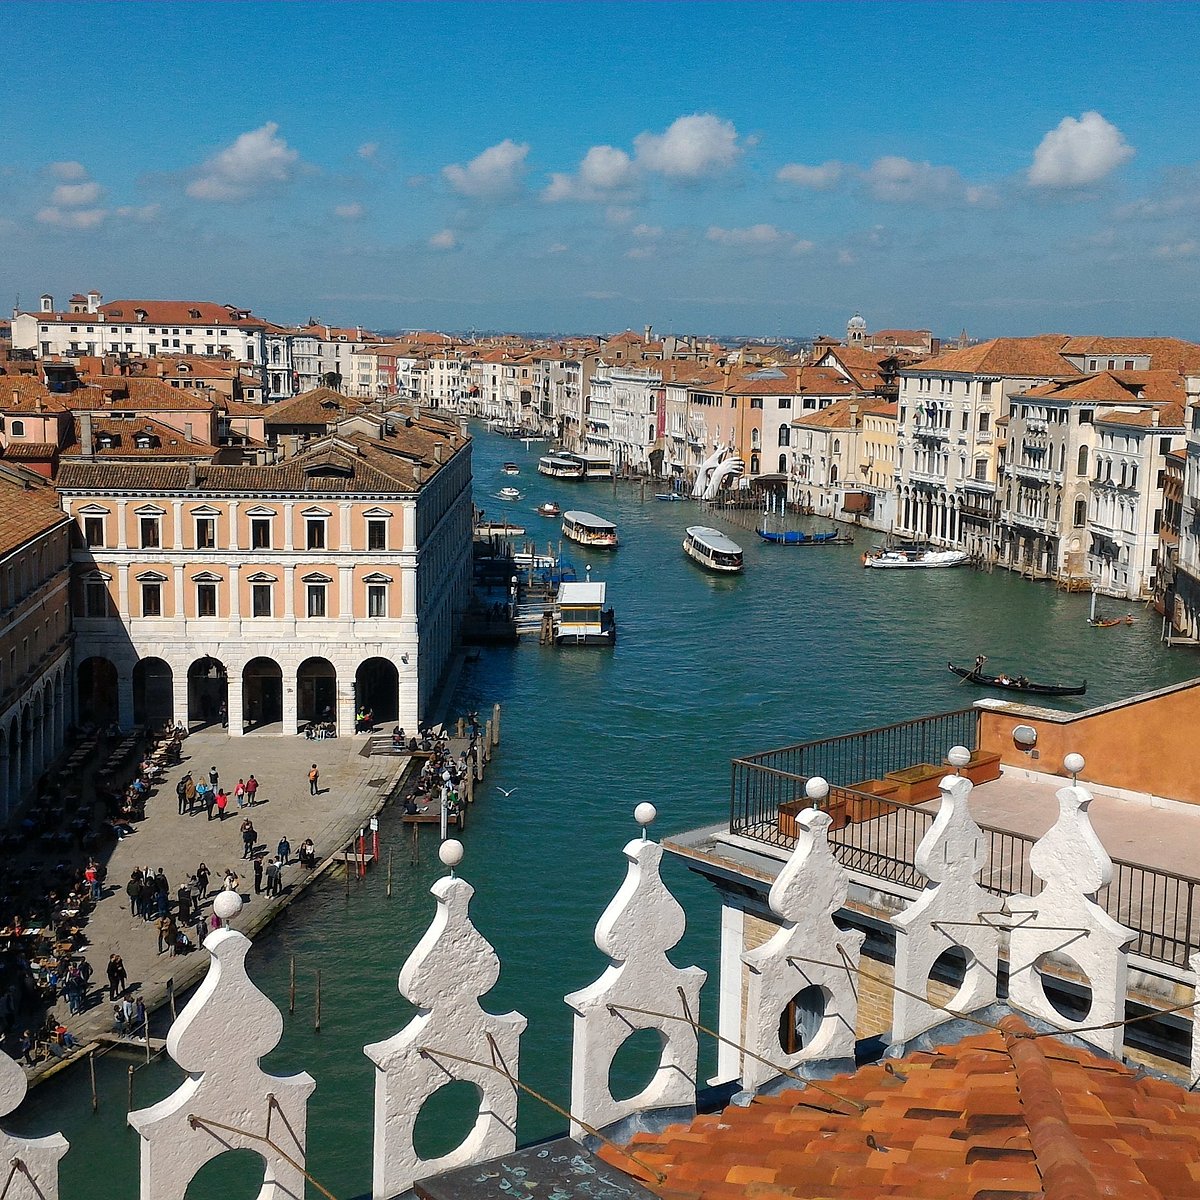 In Venice, An Historic Palazzo Becomes Model for a New DFS Retail